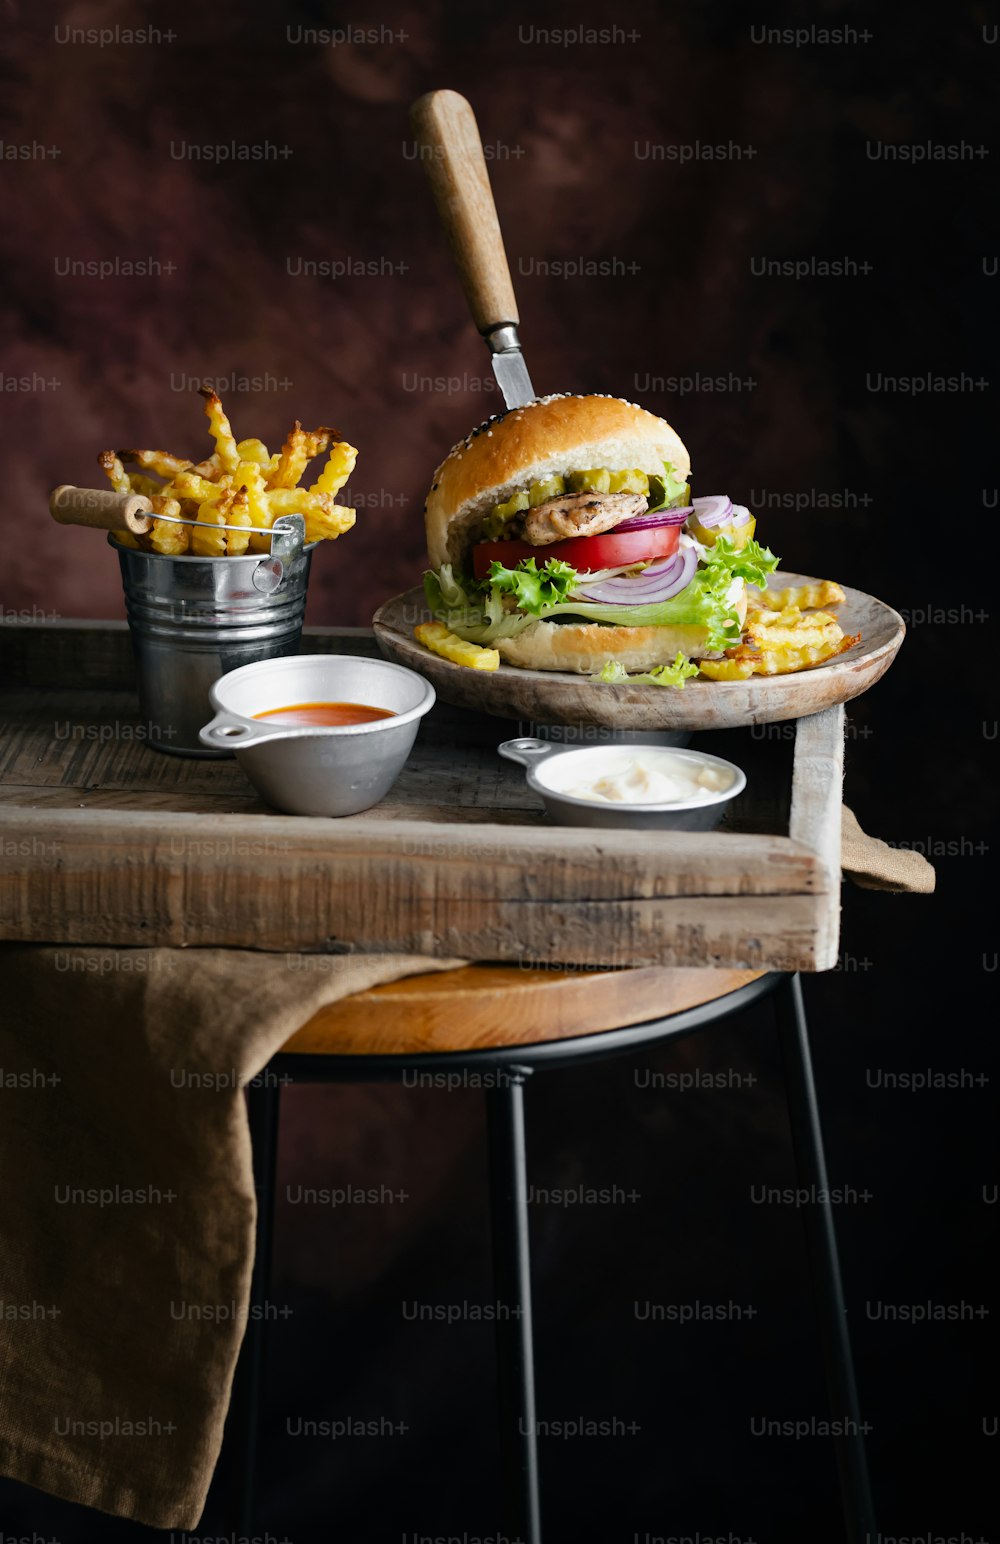 a plate of fries and a sandwich on a table